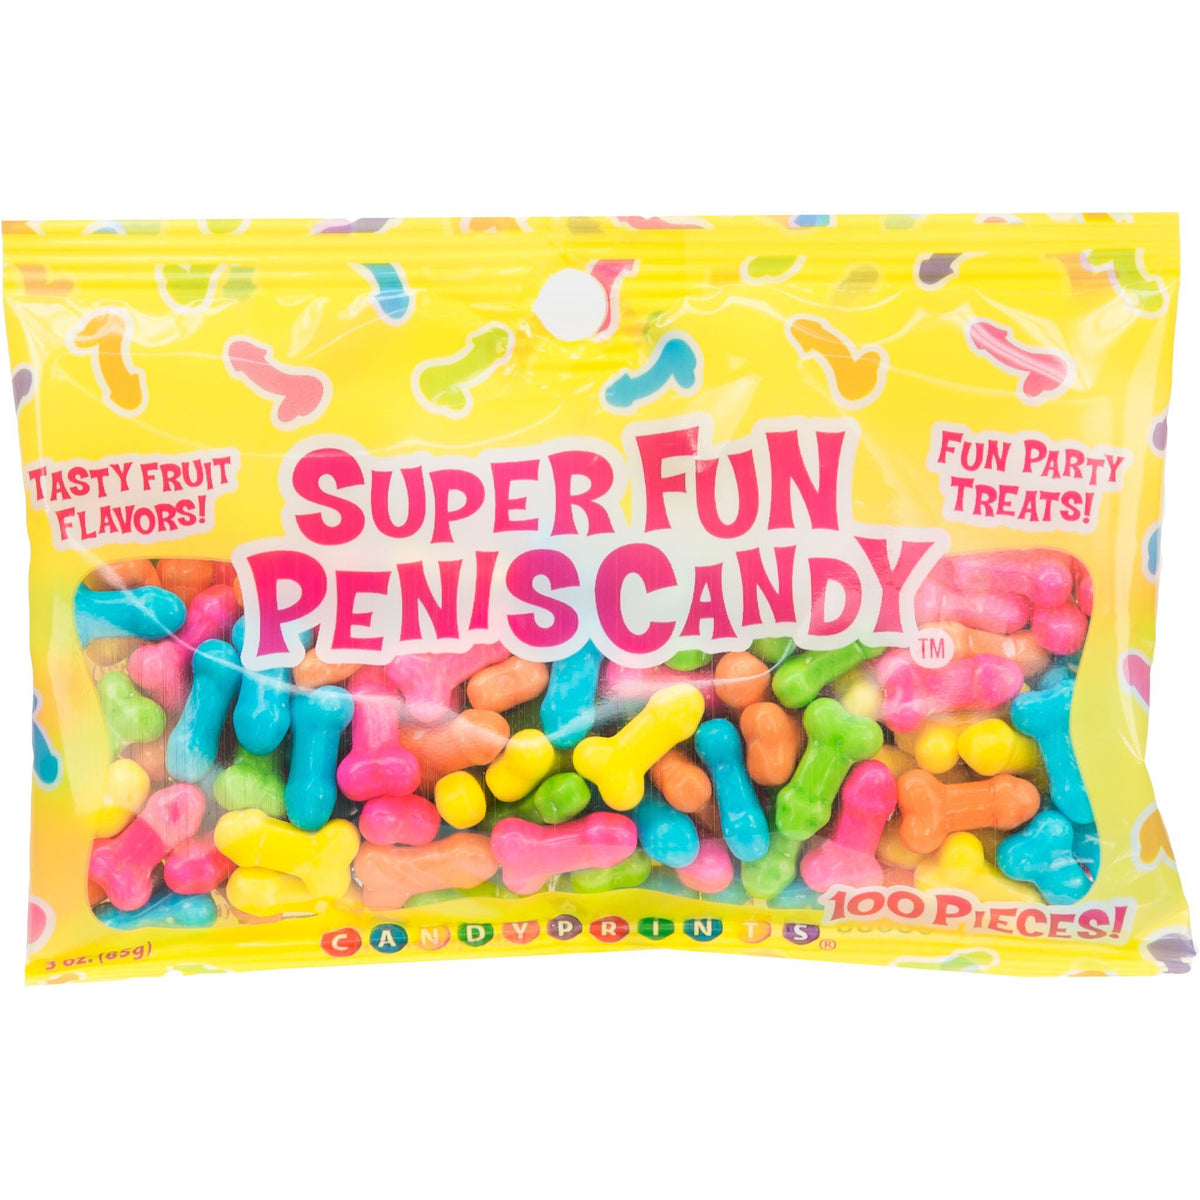 Candyprints Candy Pouch - Penis Shaped Rainbow Candy